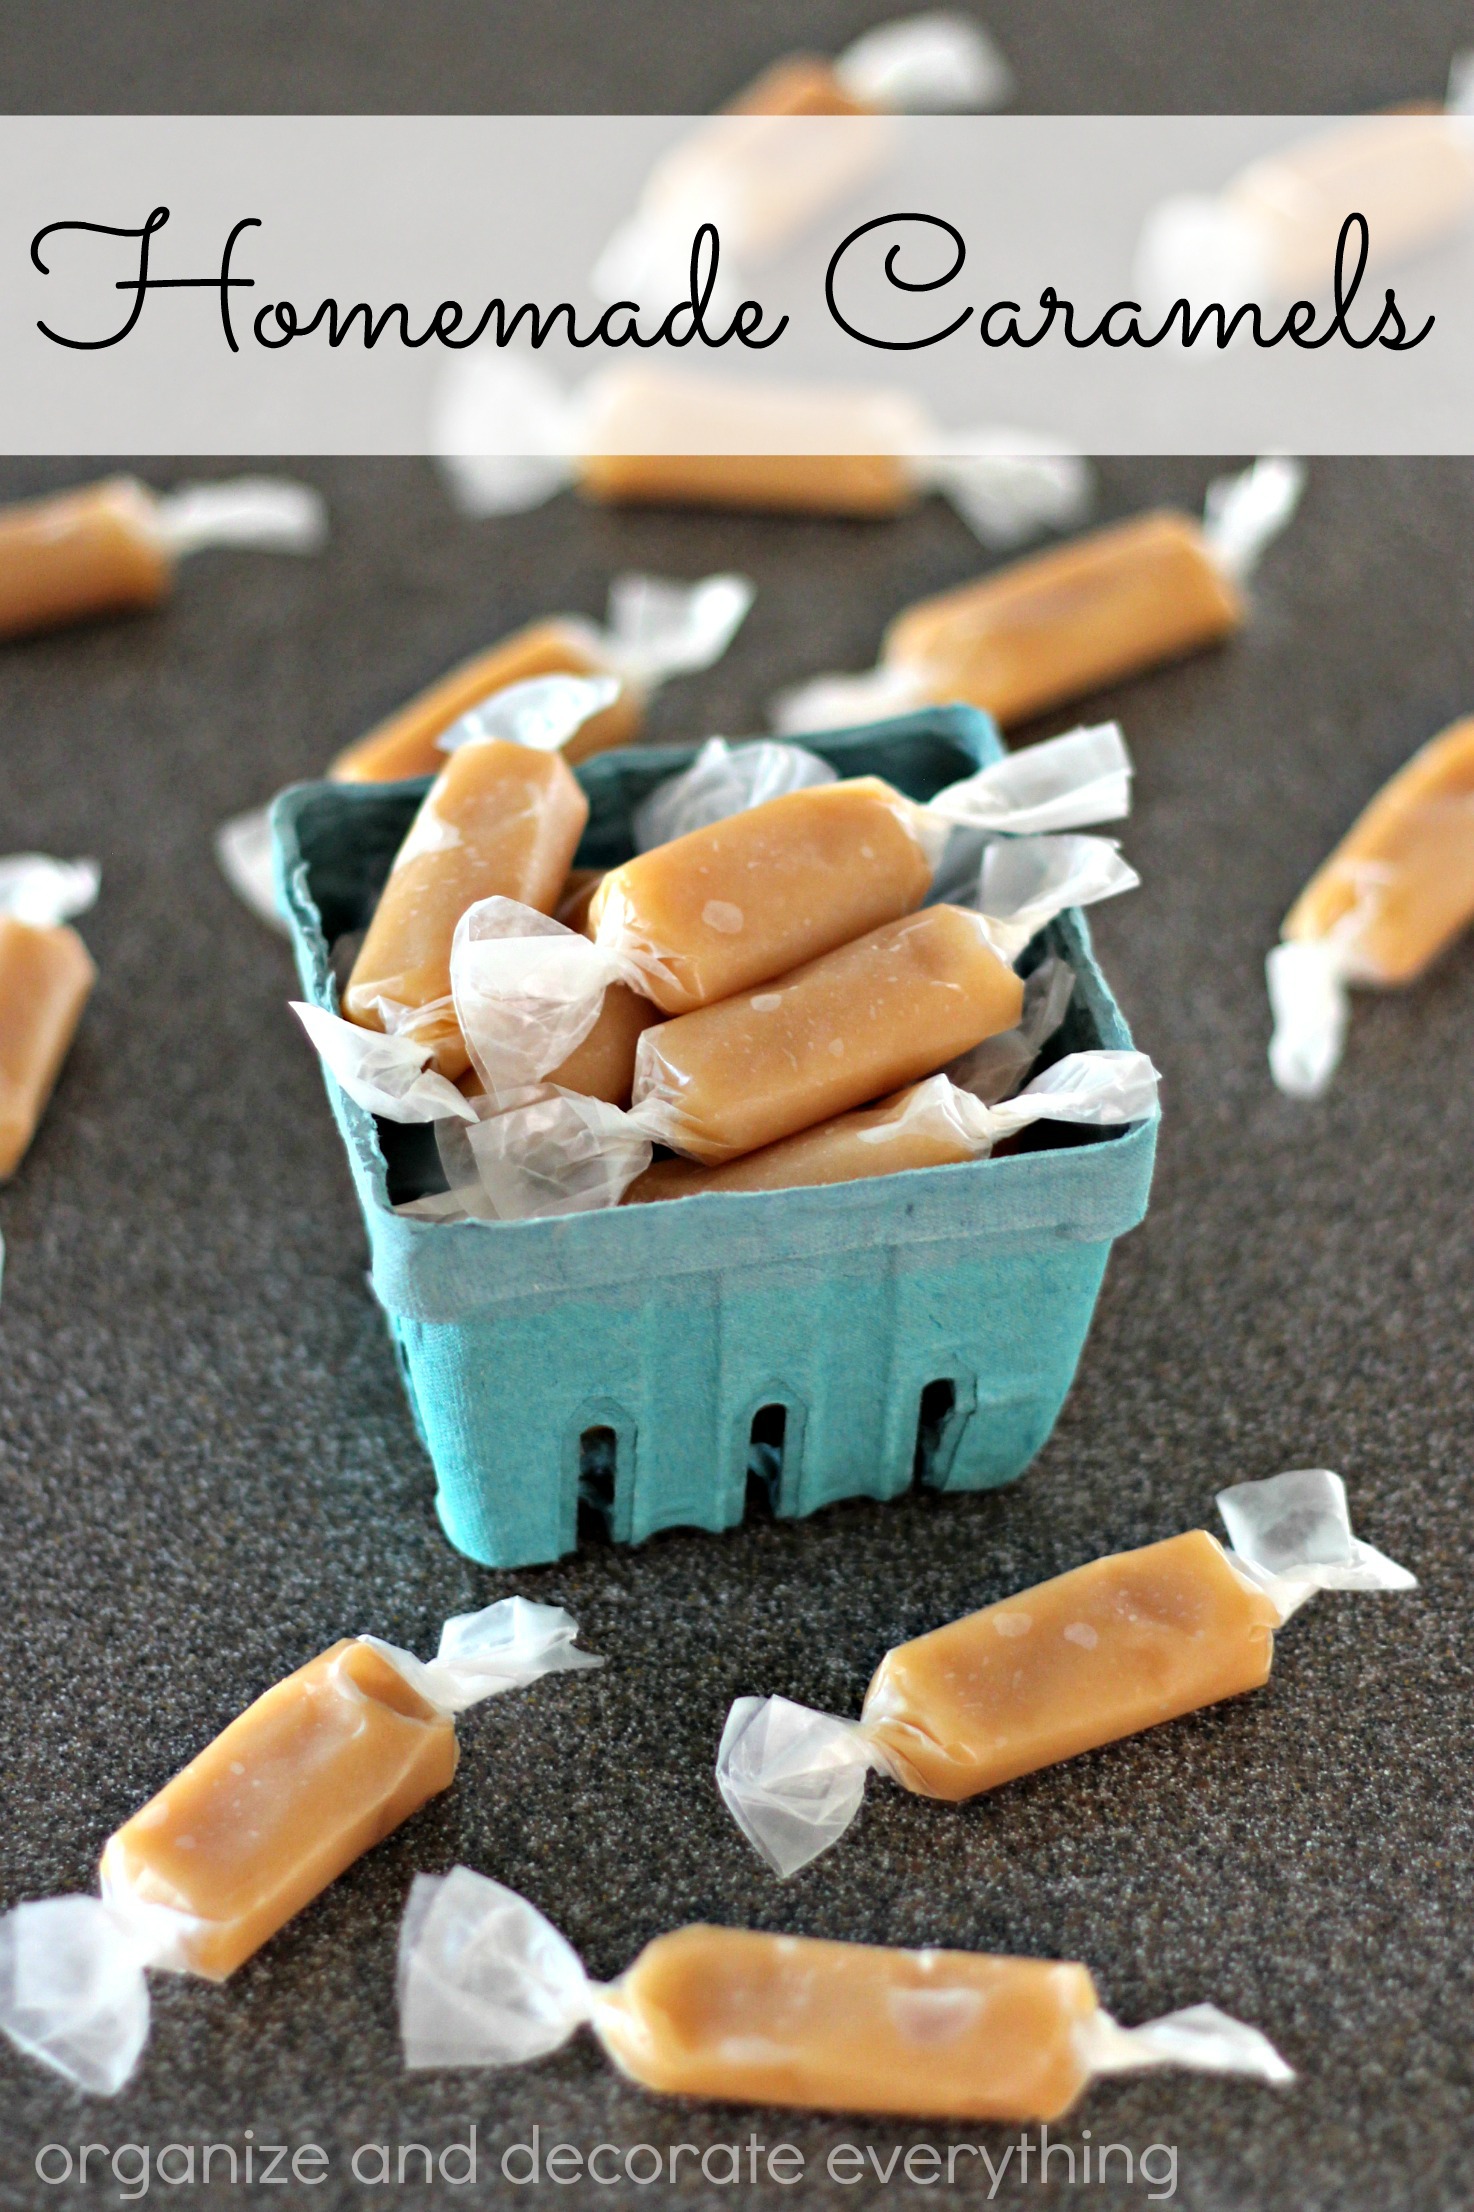 Homemade Caramels - Organize and Decorate Everything